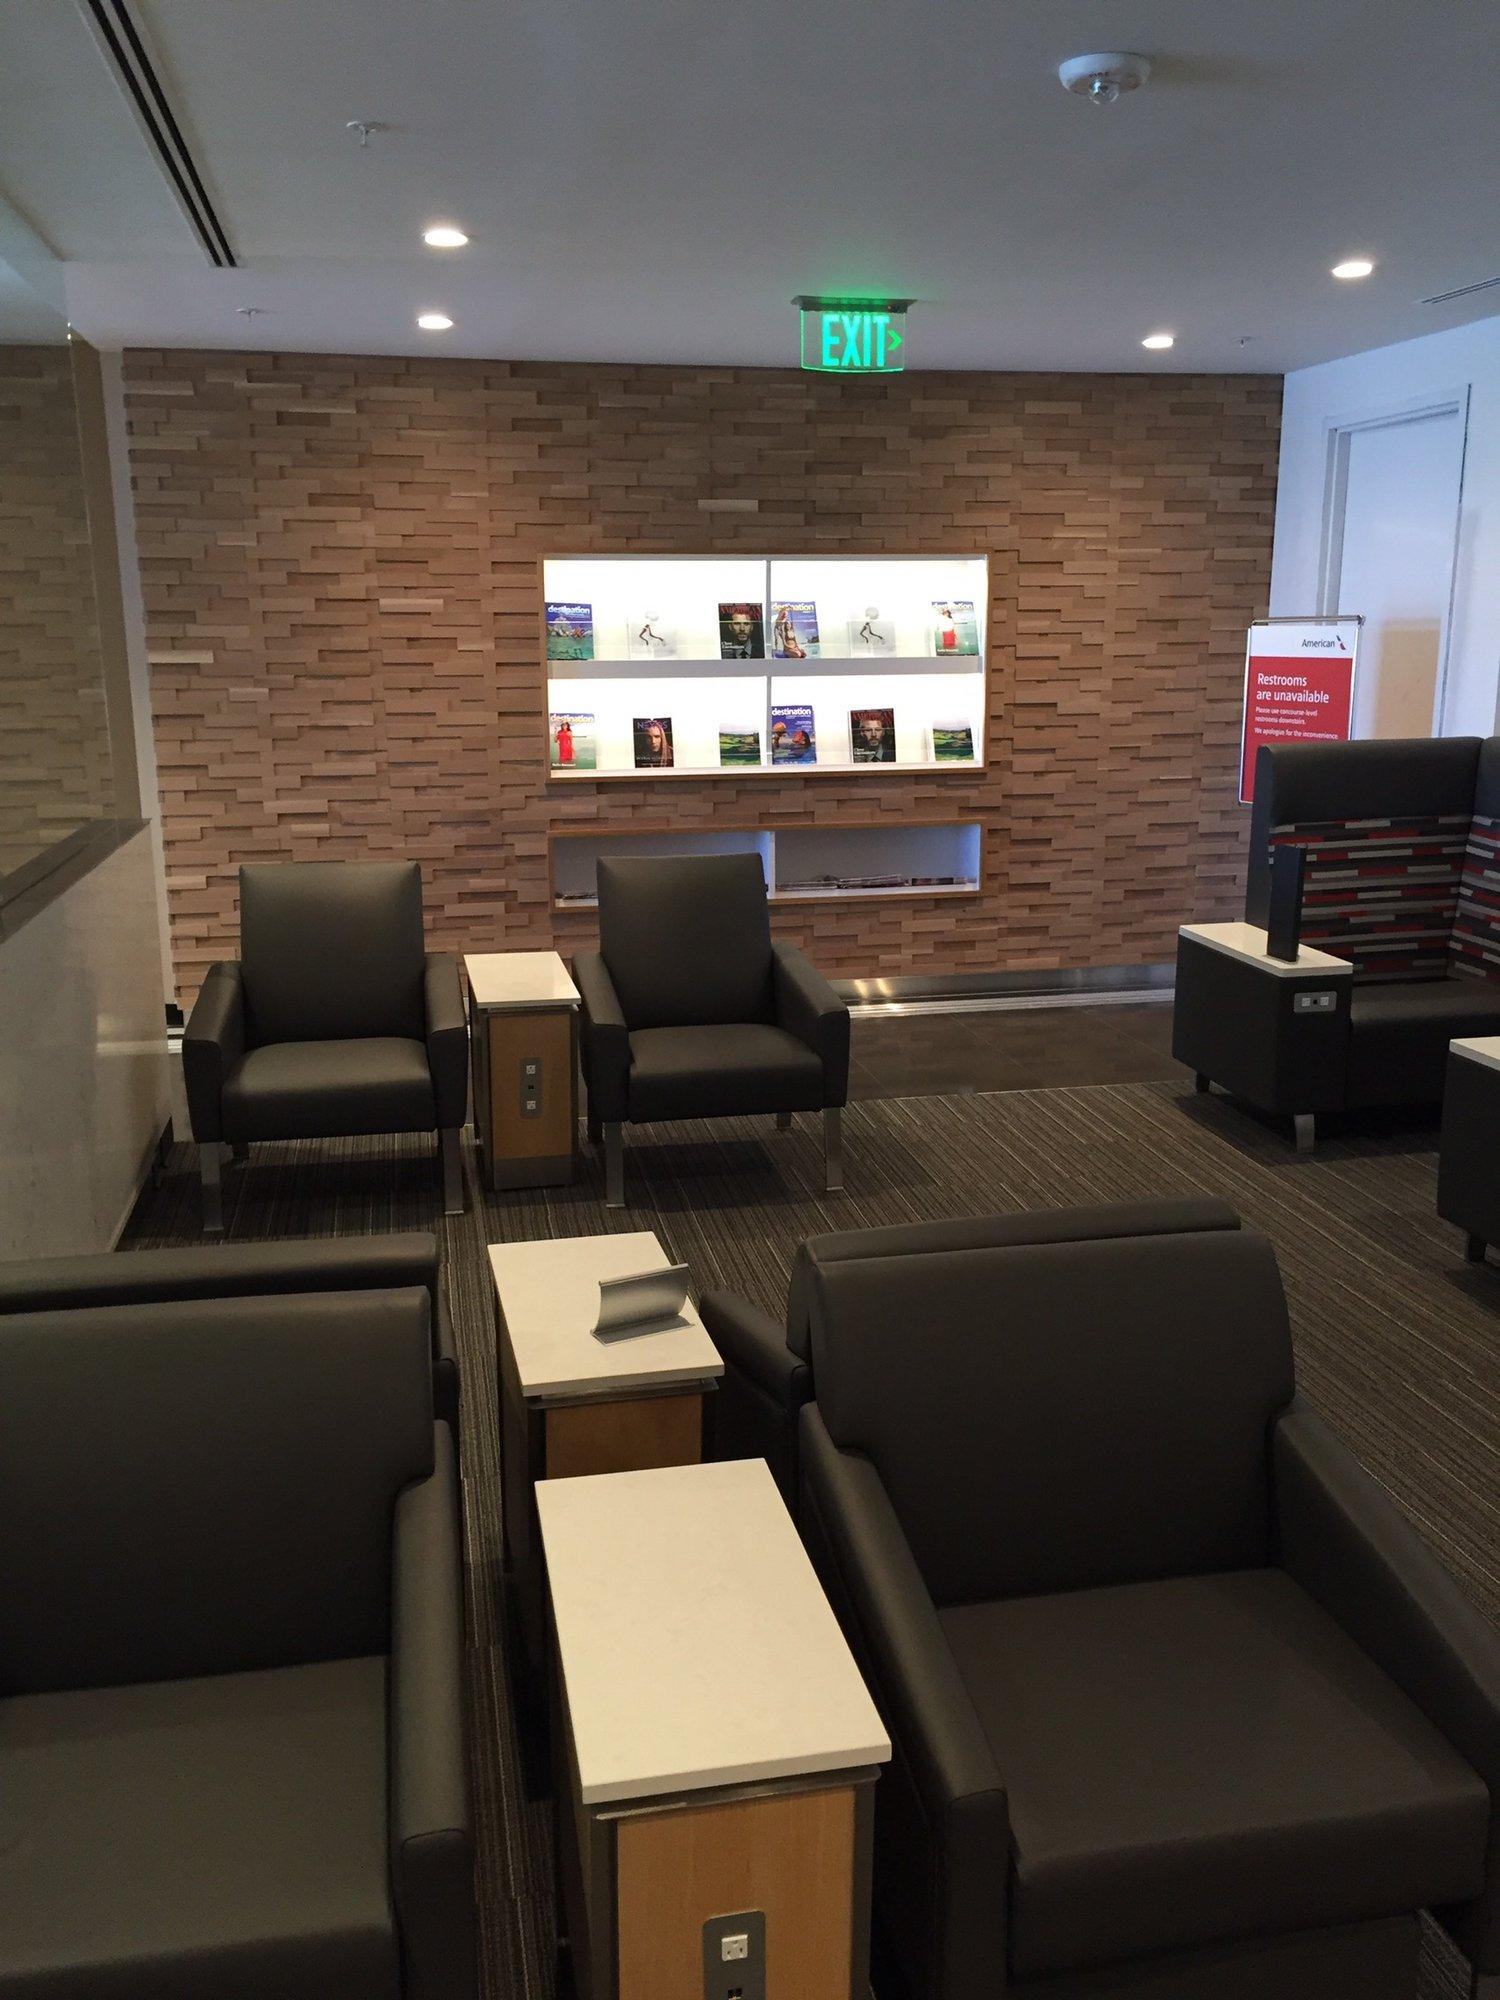 American Airlines Admirals Club (Gate D15) image 11 of 25